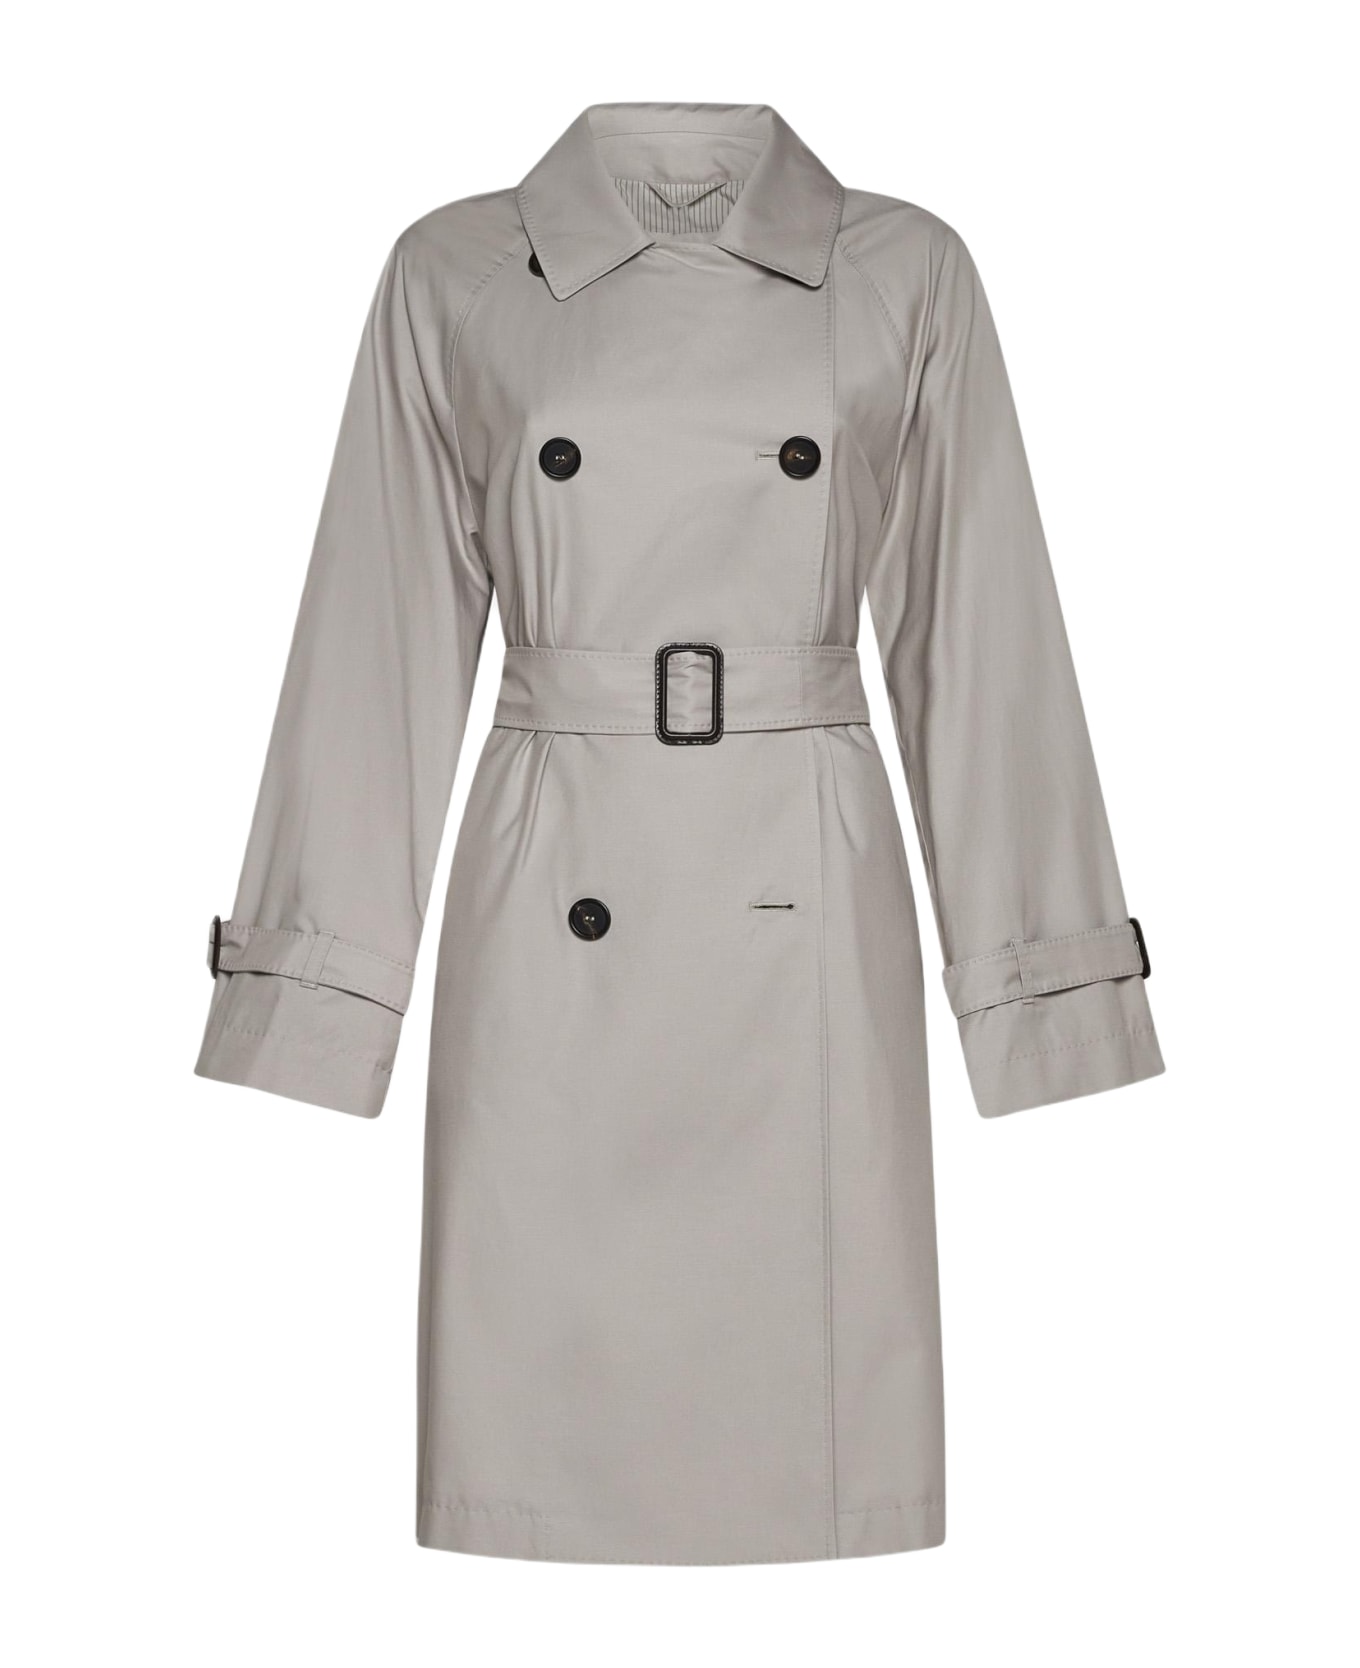 Max Mara The Cube Cotton-blend Double-breasted Trench Coat - Ecru レインコート